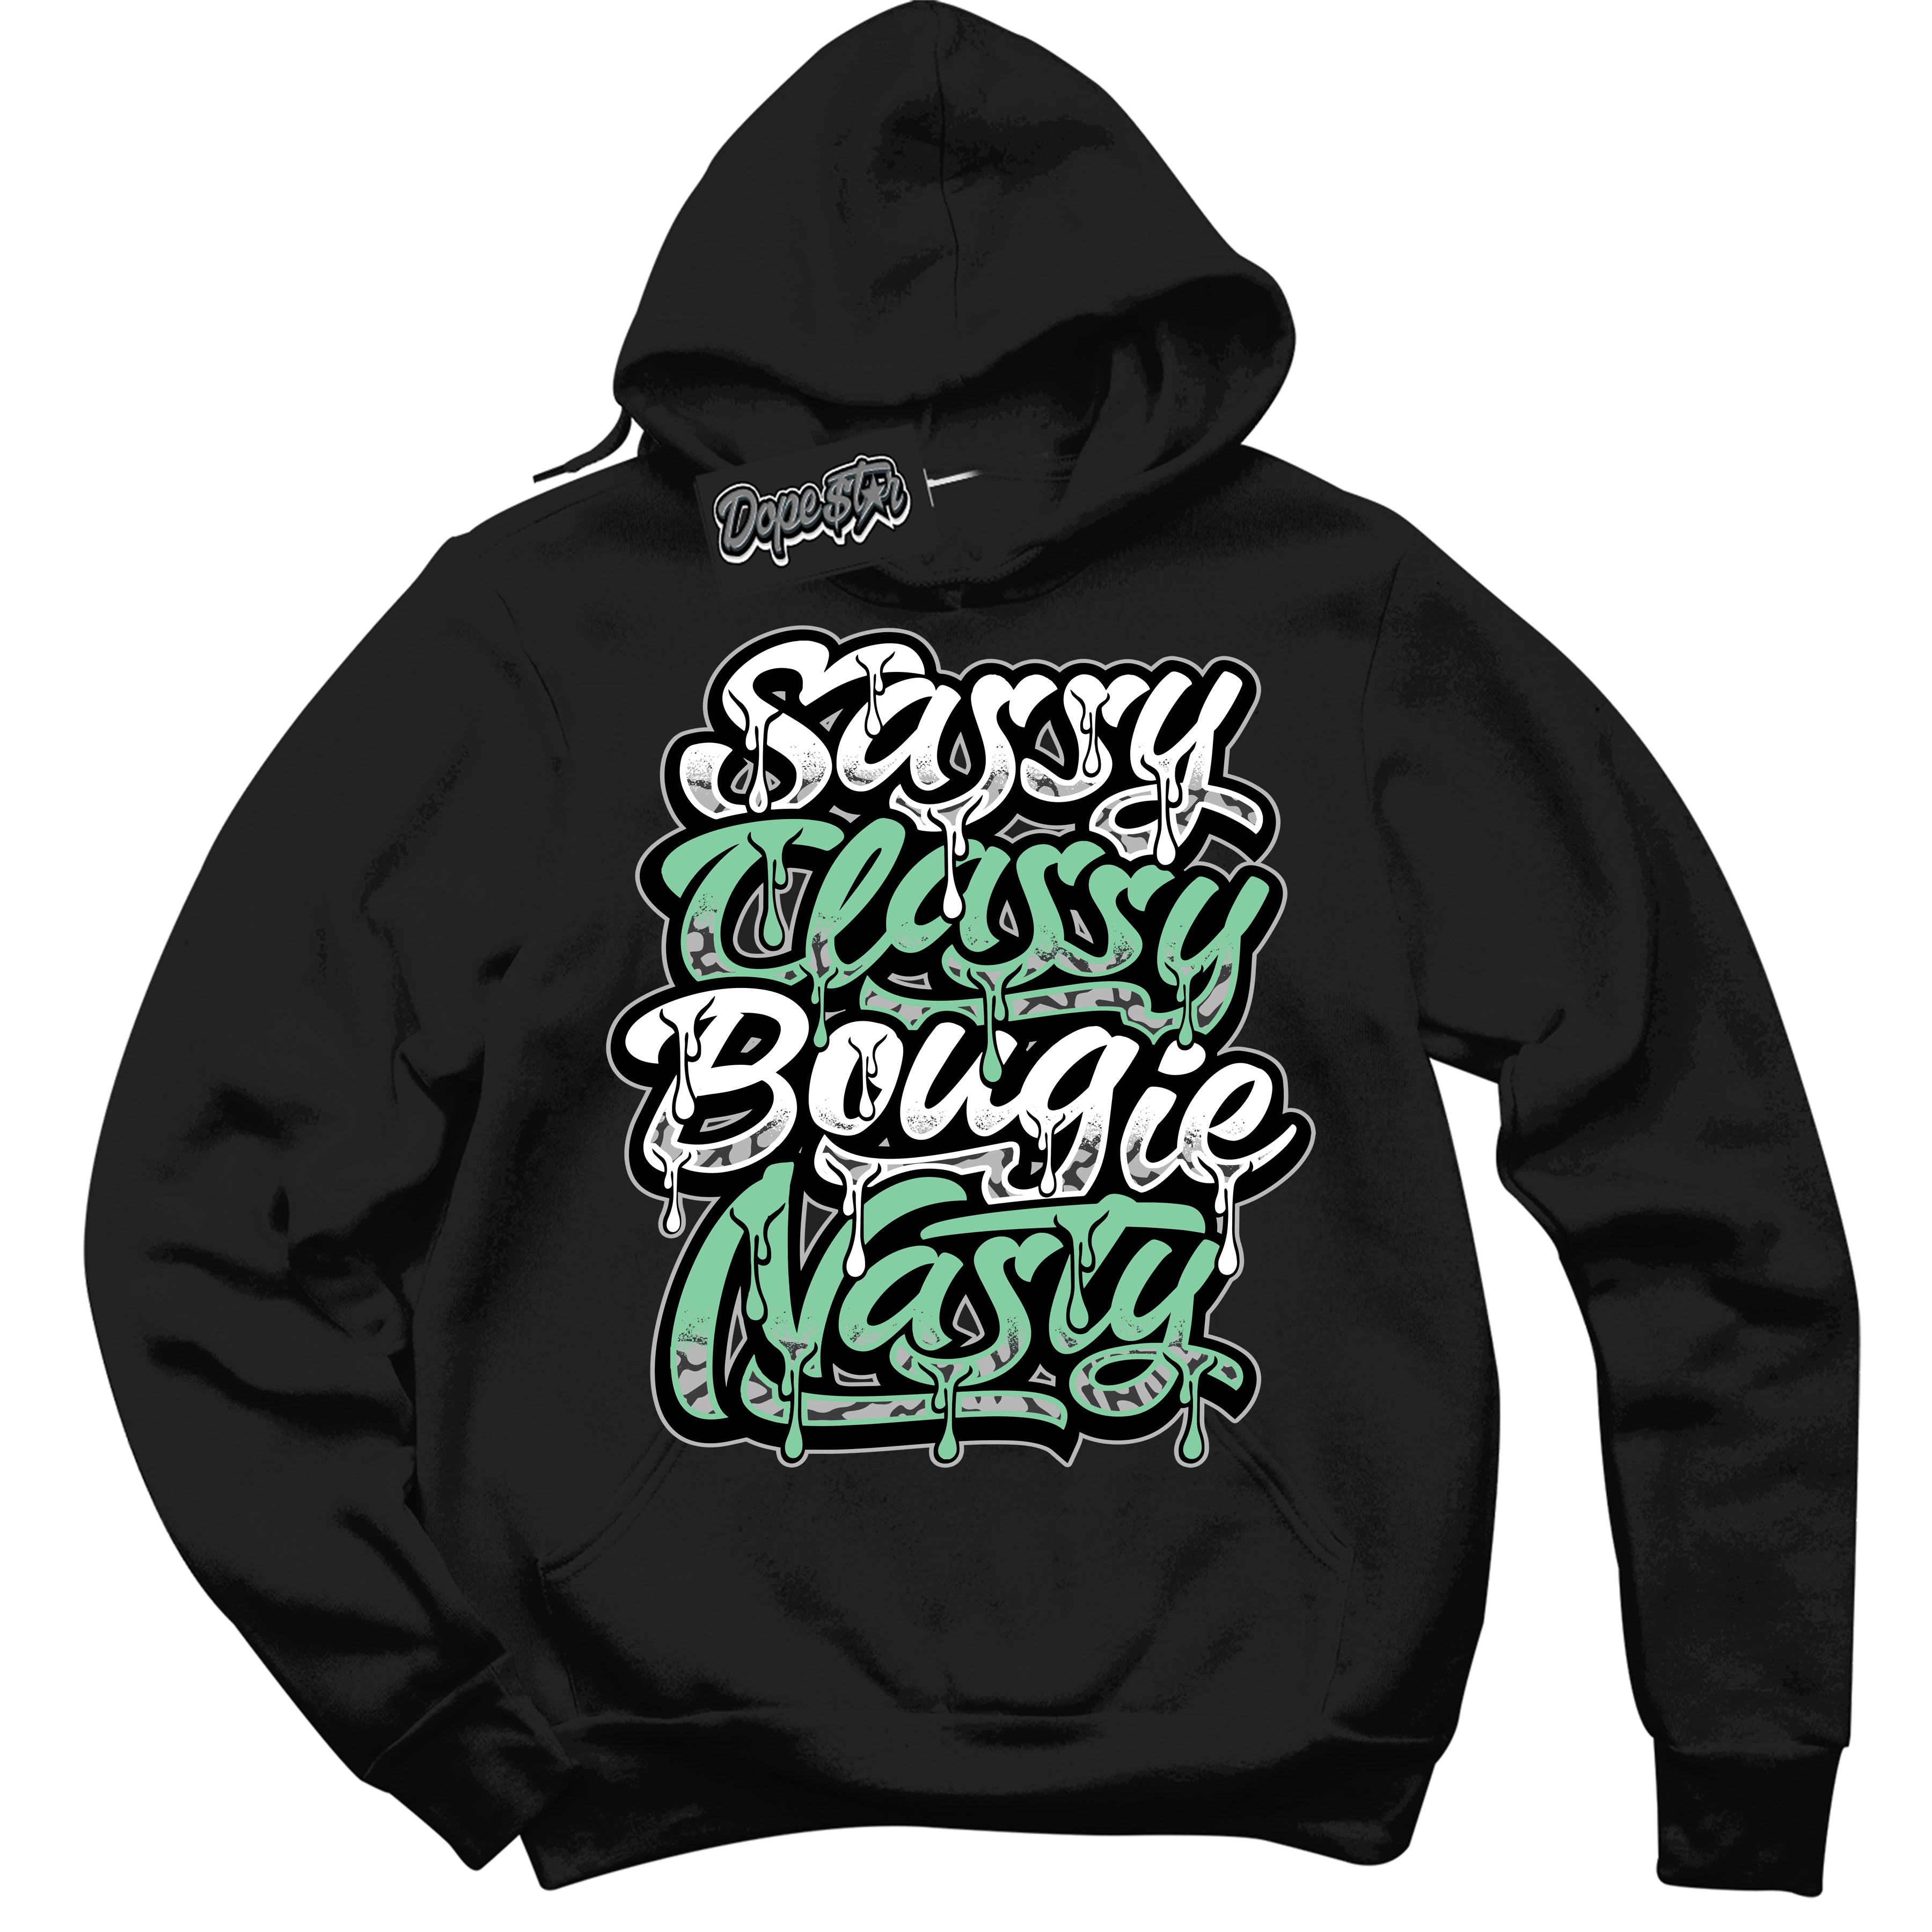 Cool Black Graphic DopeStar Hoodie with “ Sassy Classy “ print, that perfectly matches Green Glow 3S sneakers